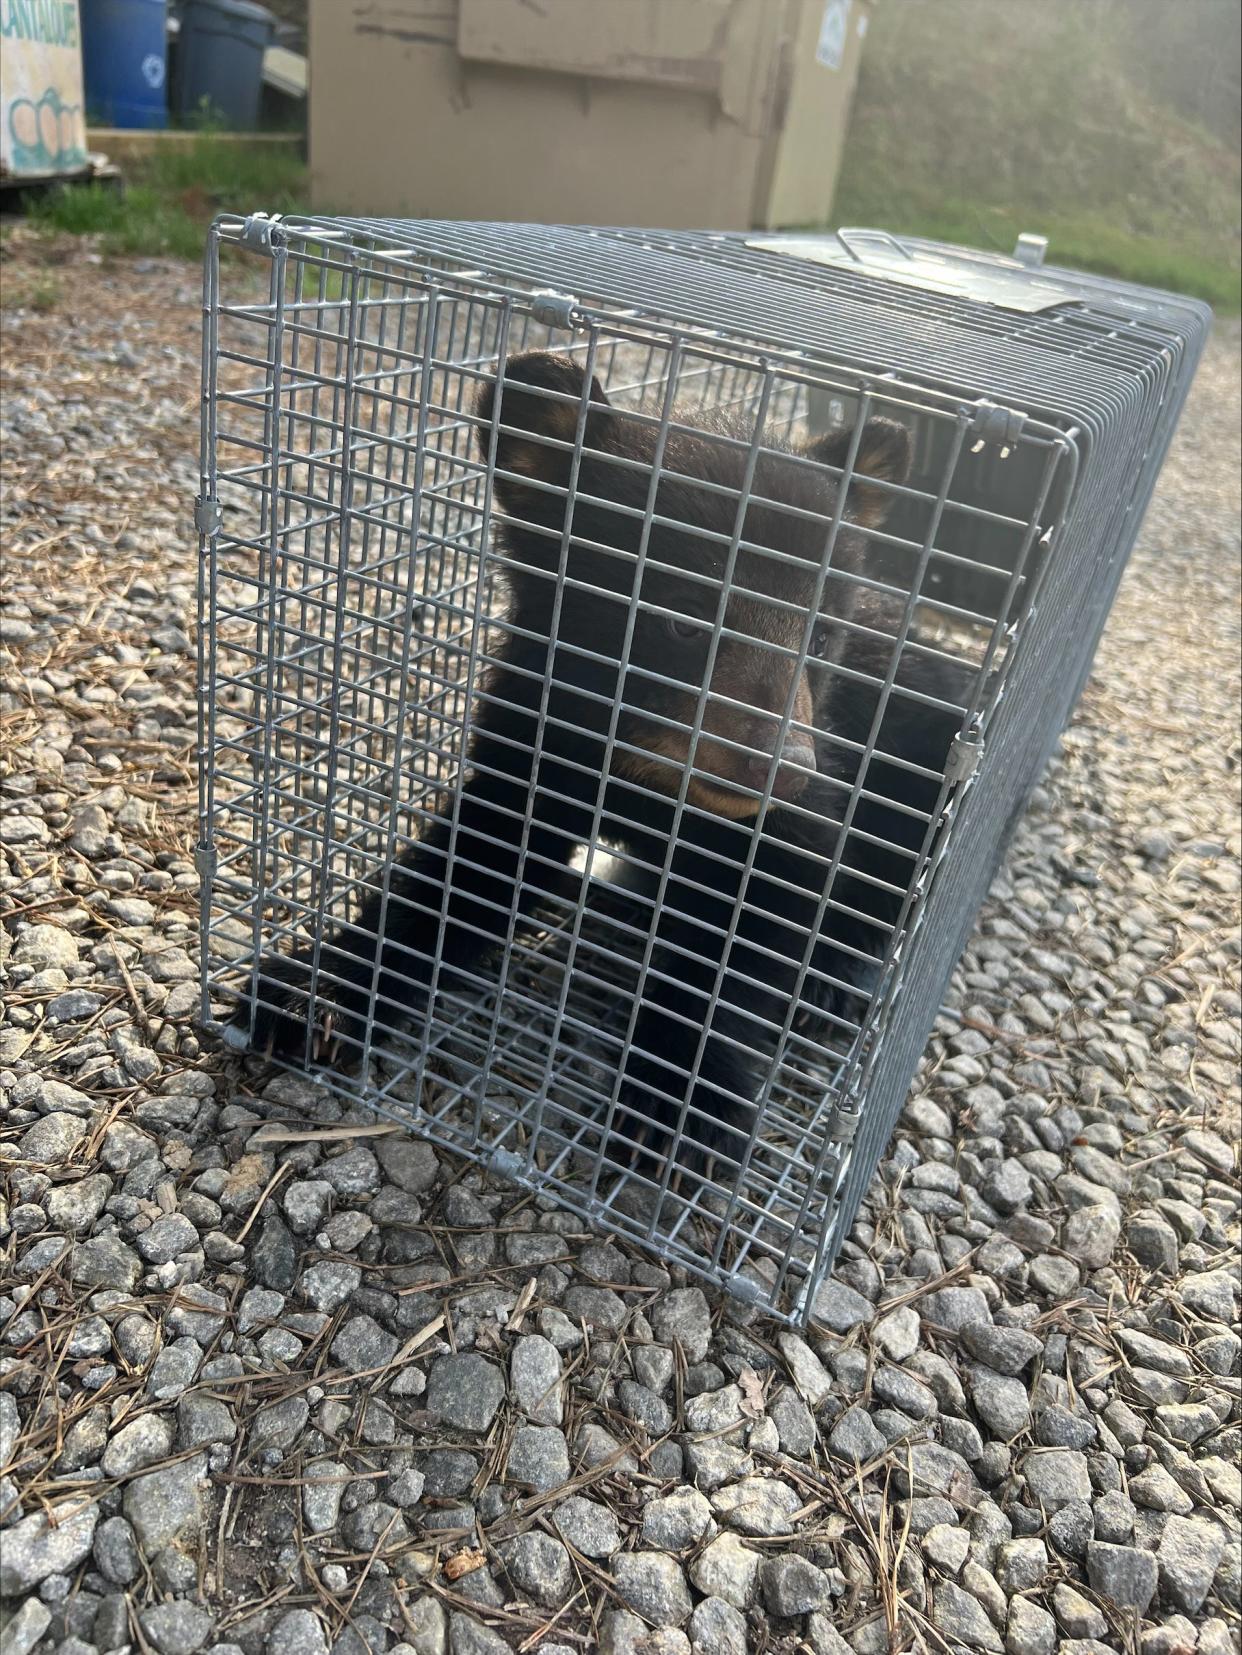 A cub found at Berrington Village Apartments, after residents tried to take a selfie with it, was temporarily placed in a cage for transport to the Appalachian Wildlife Refuge in Candler, NC.